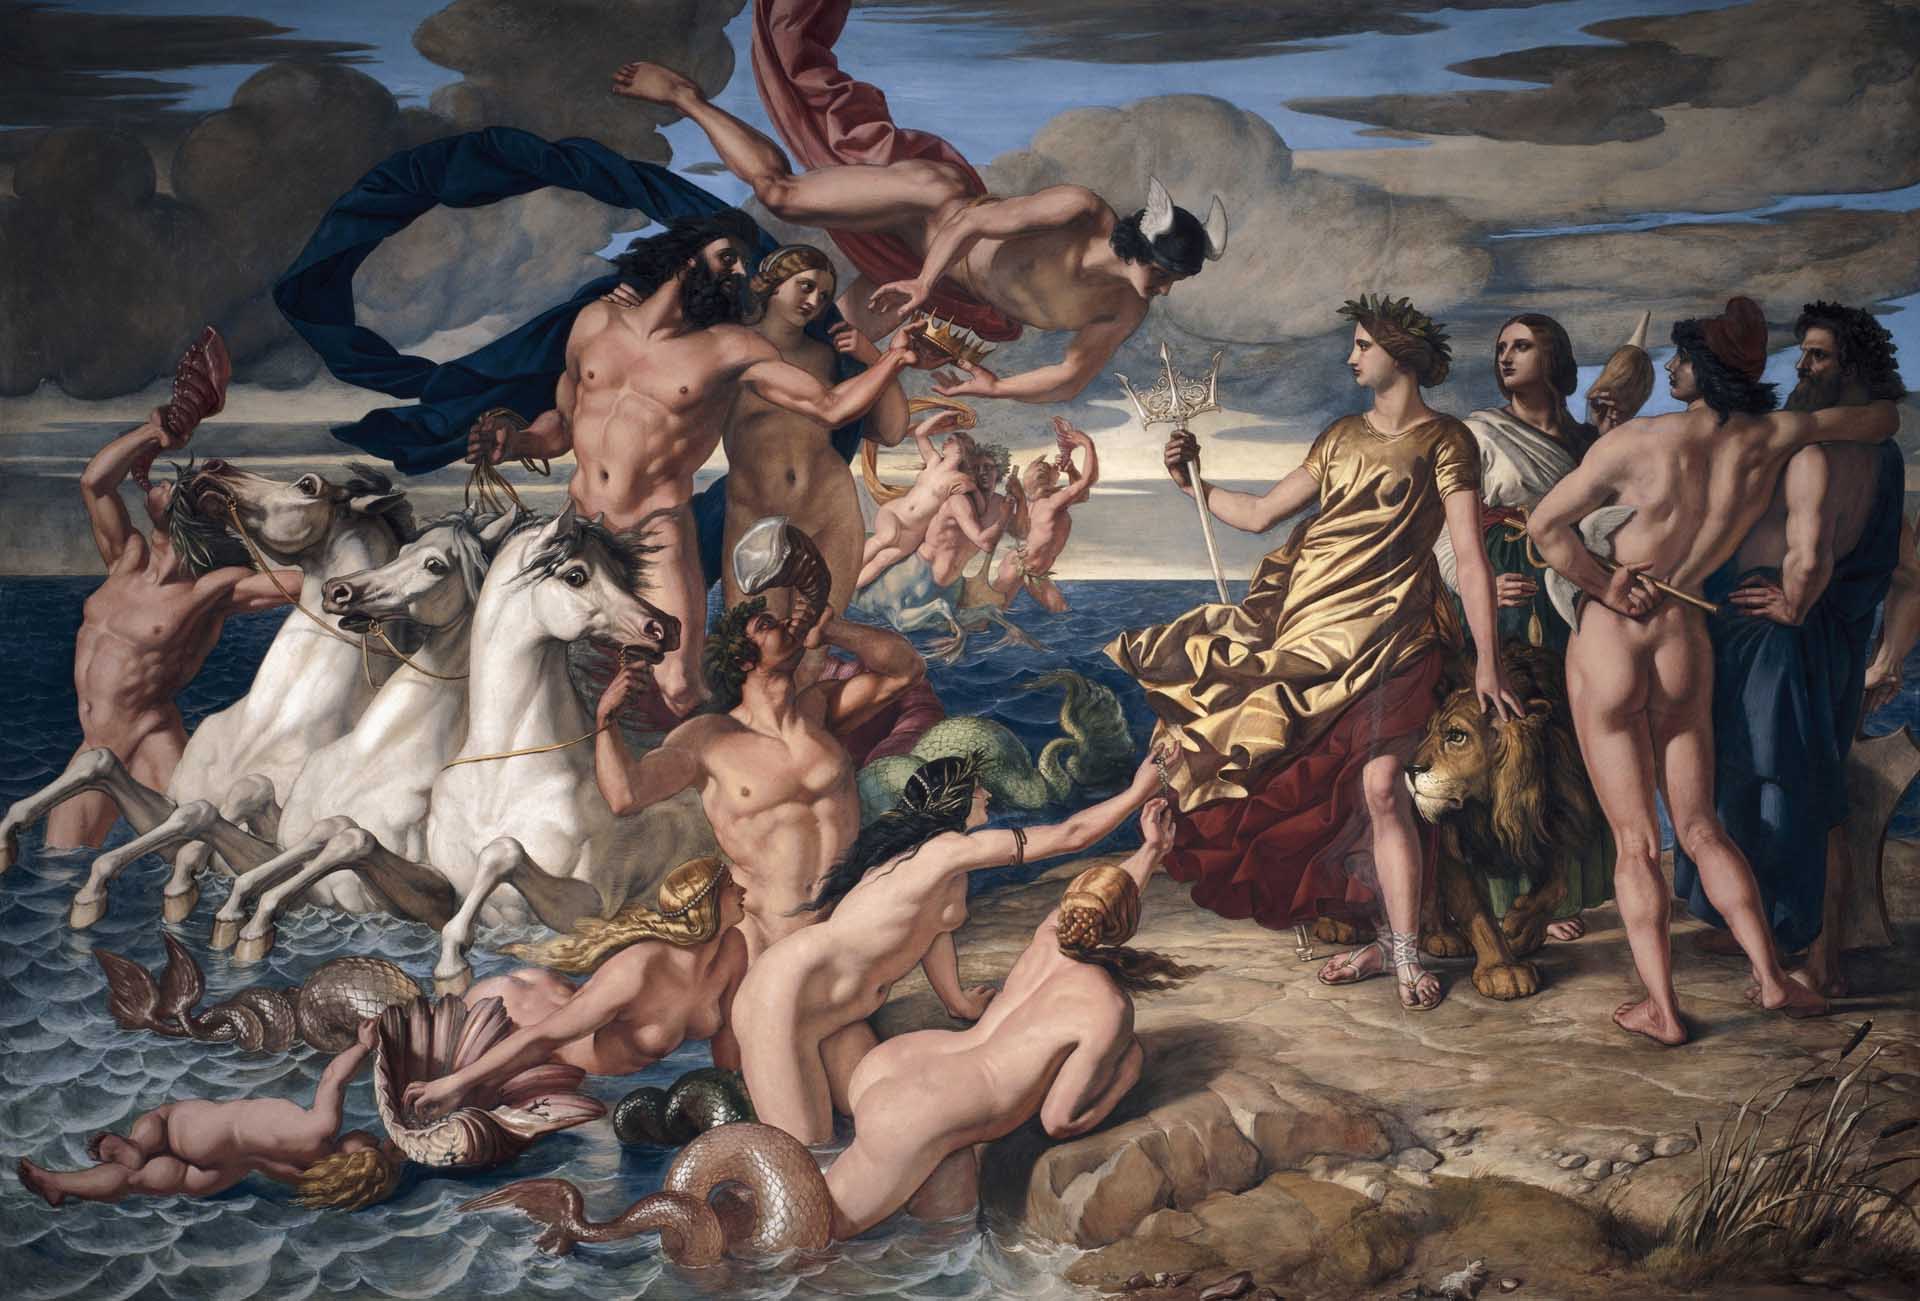 Neptune Resigning to Britannia the Empire of the Sea by Scottish artist William Dyce, 1847. This painting shows Britannia with all the attributes seen in Wyon's engravings: a lion, a trident and a surveying stare.